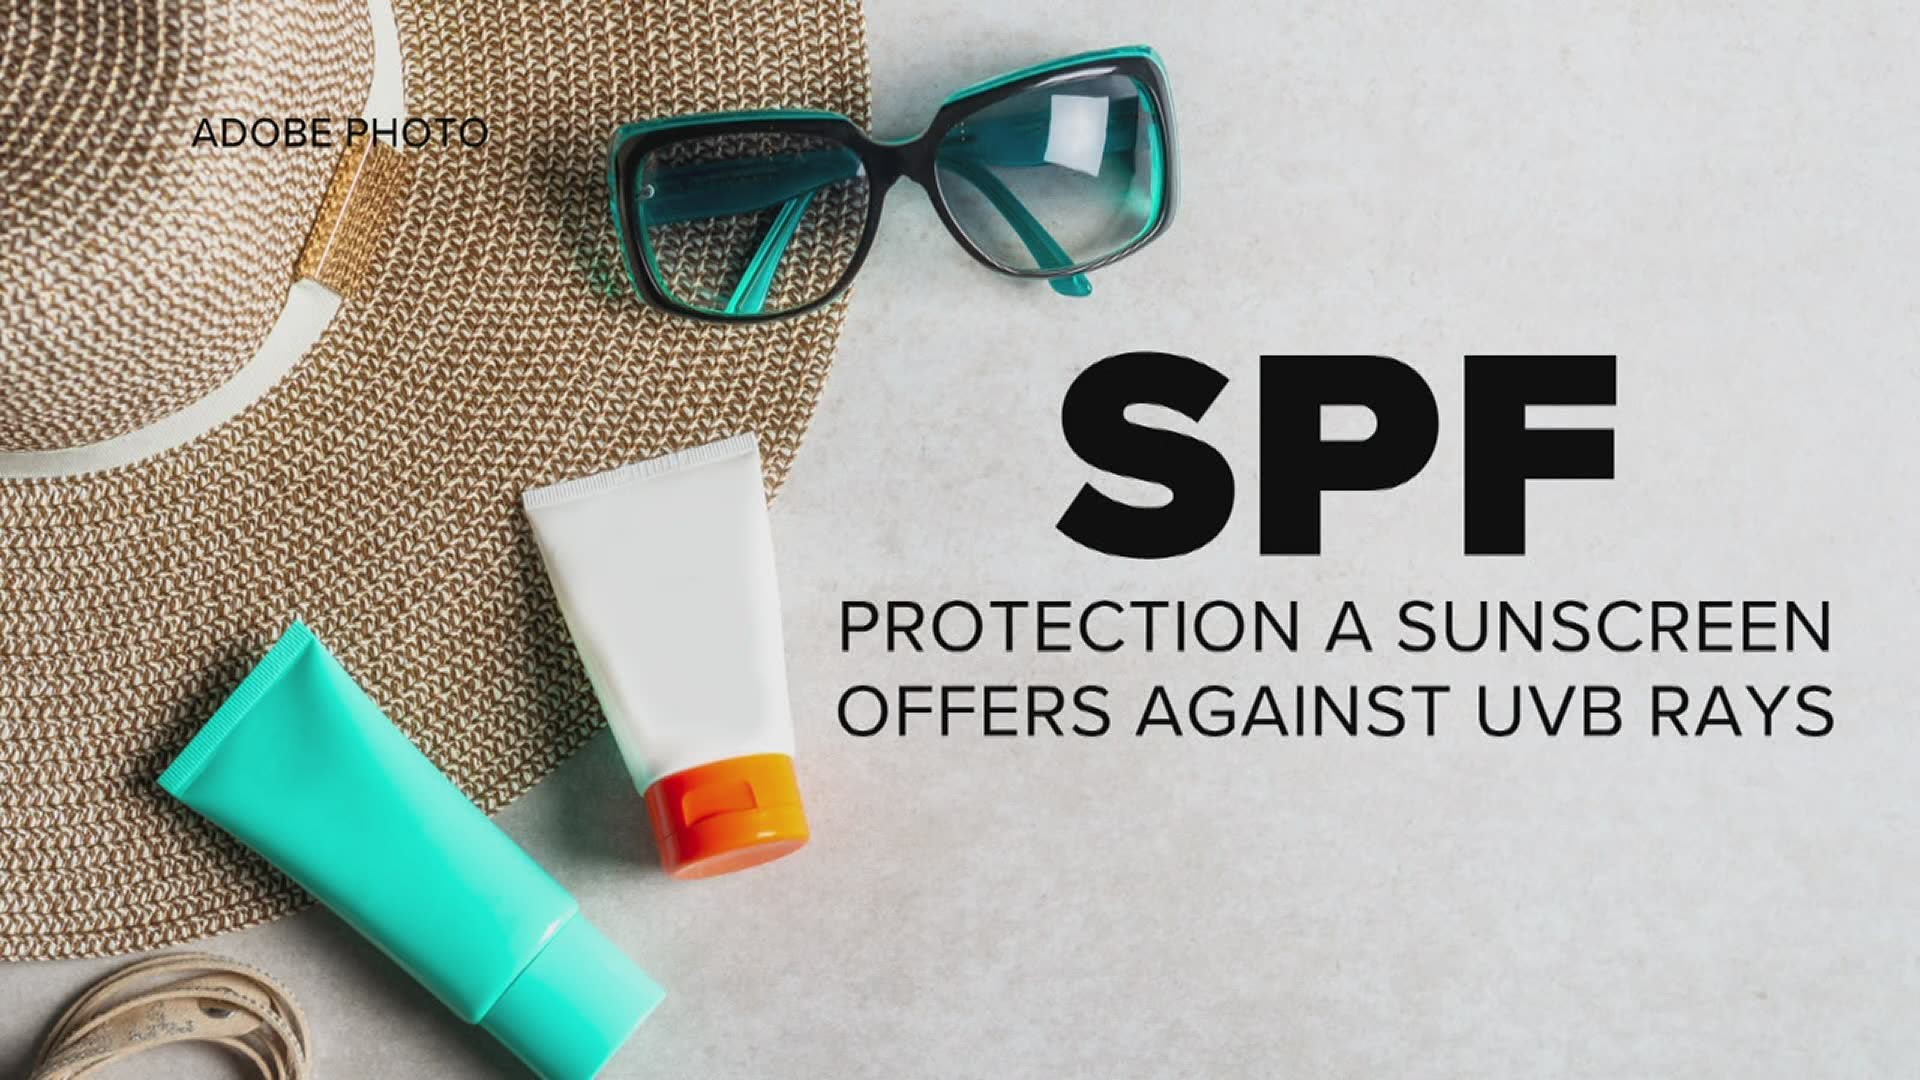 A summer of post-pandemic events and vacations means protecting your skin from the sun's harmful UV rays is more important than ever.